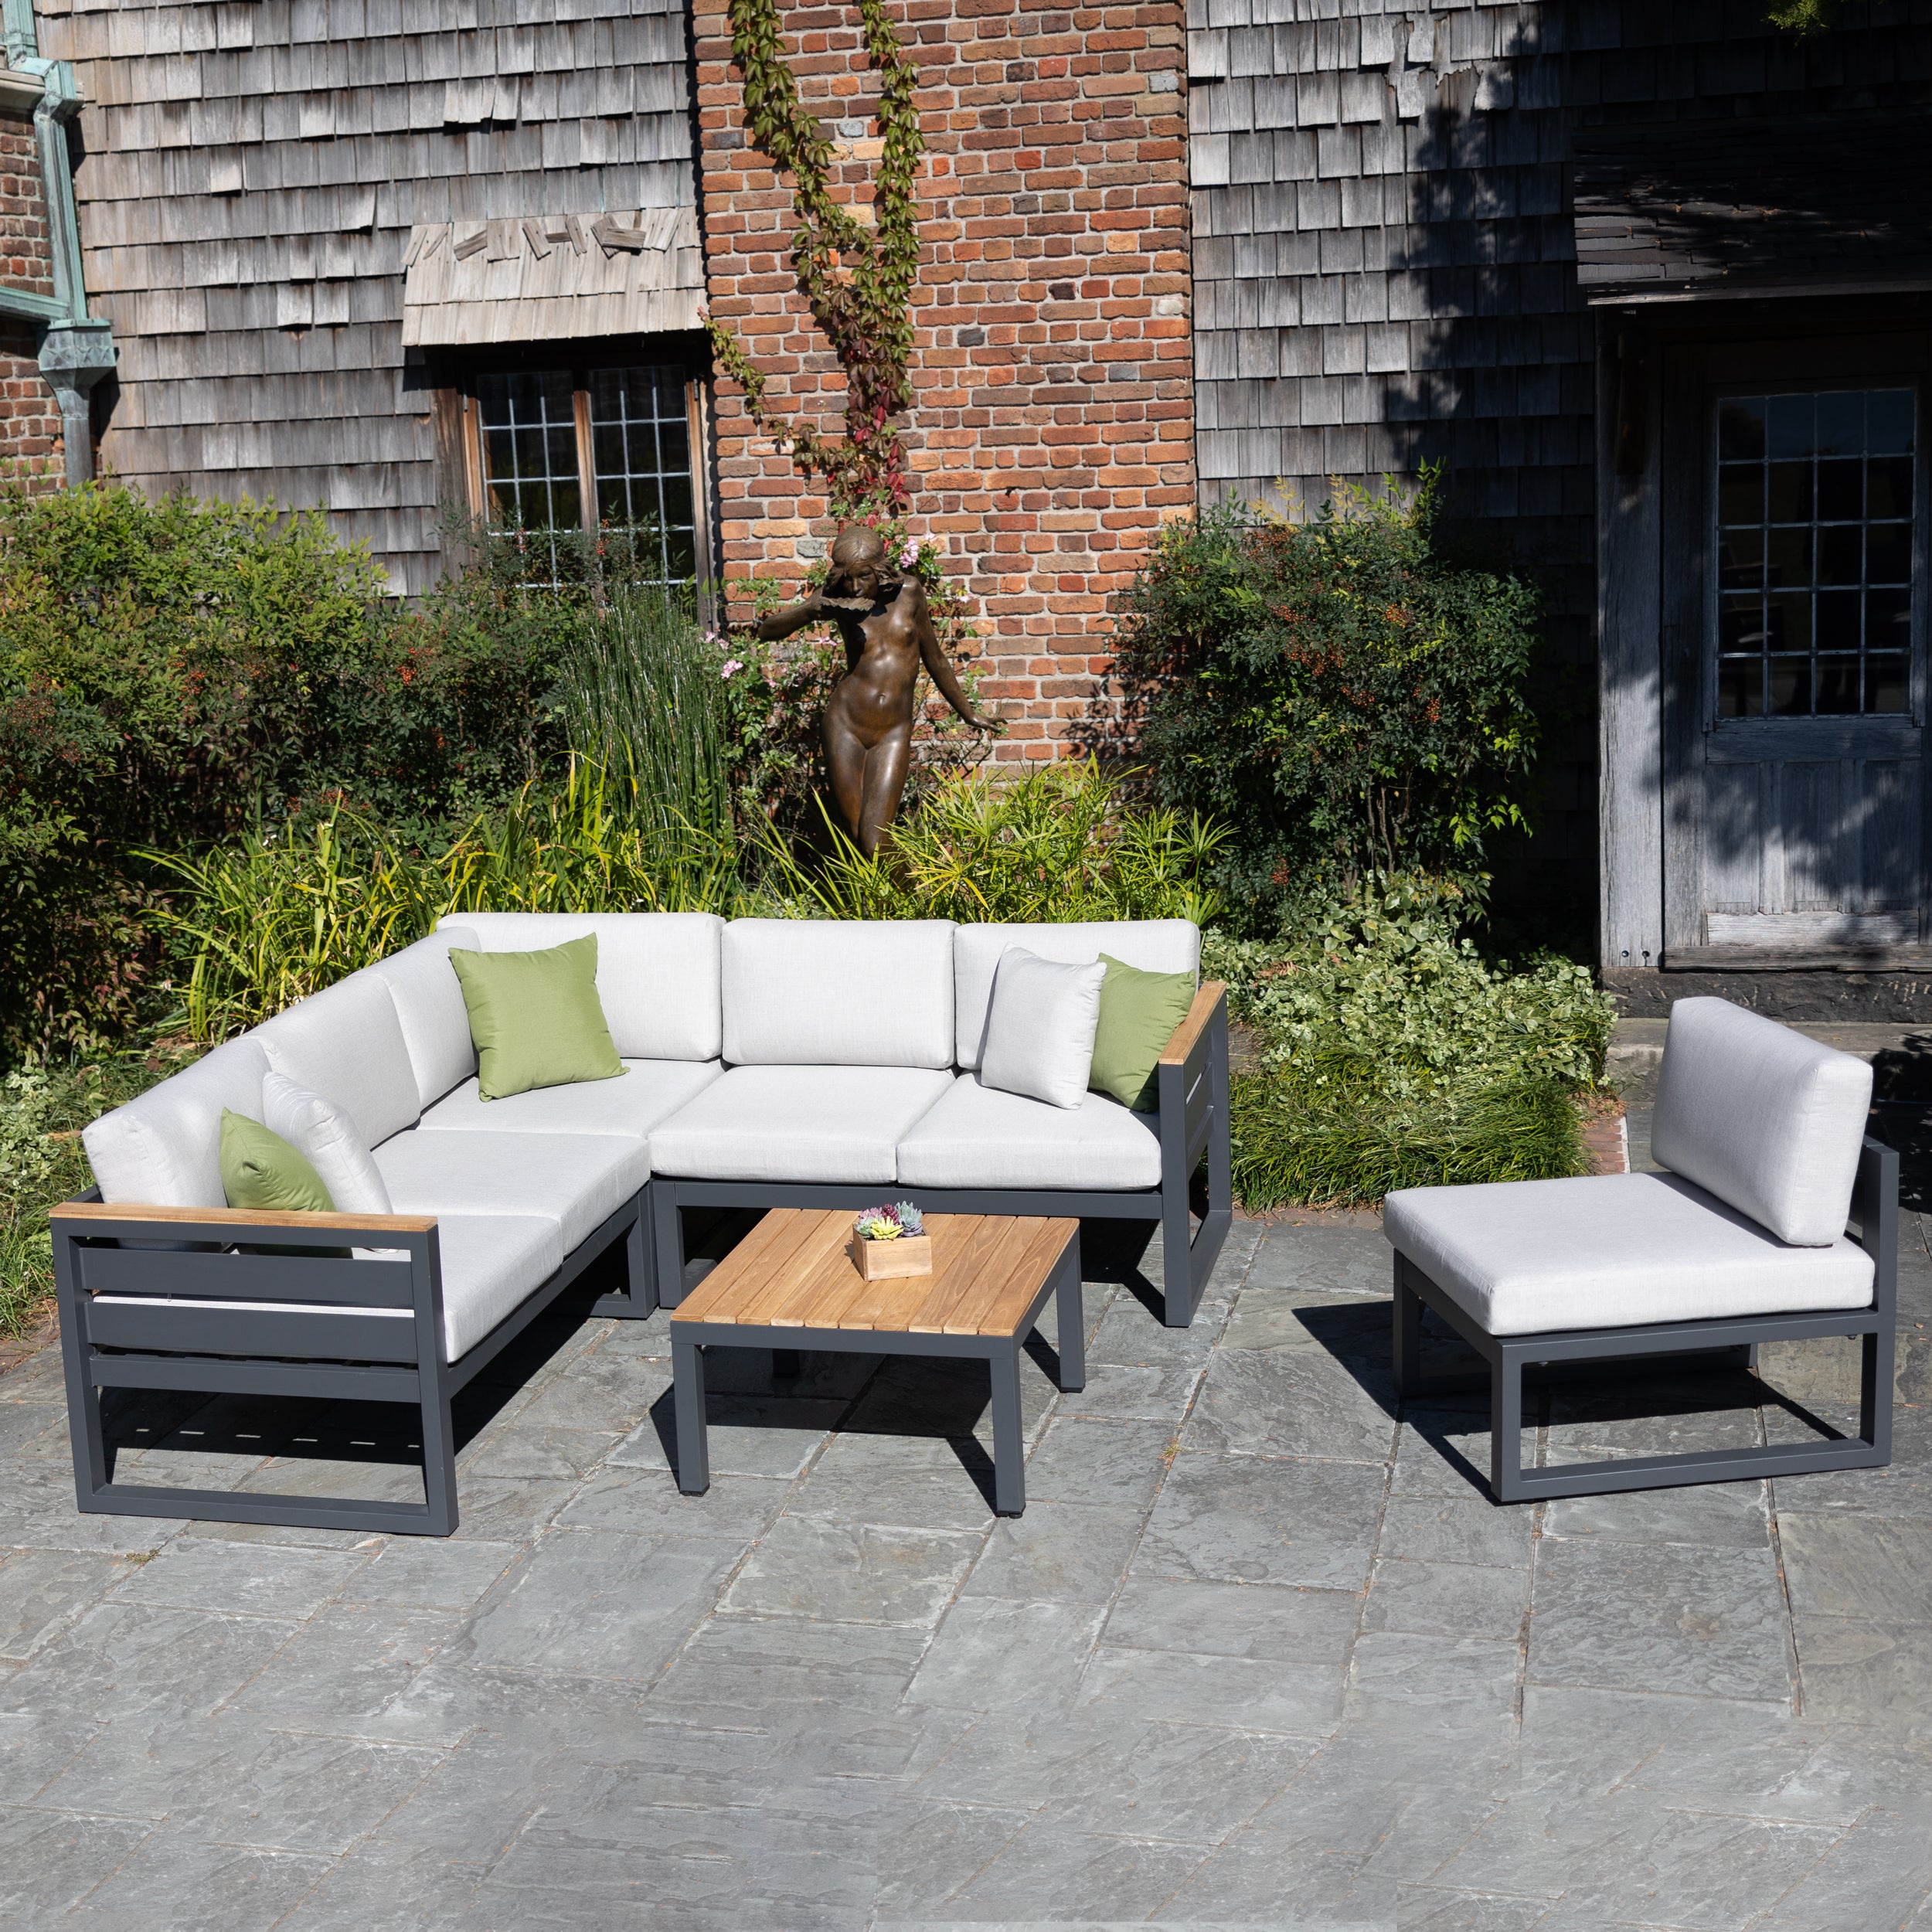 Mix and match the Elba Comfort Collection pieces to create the perfect combination for your patio space.